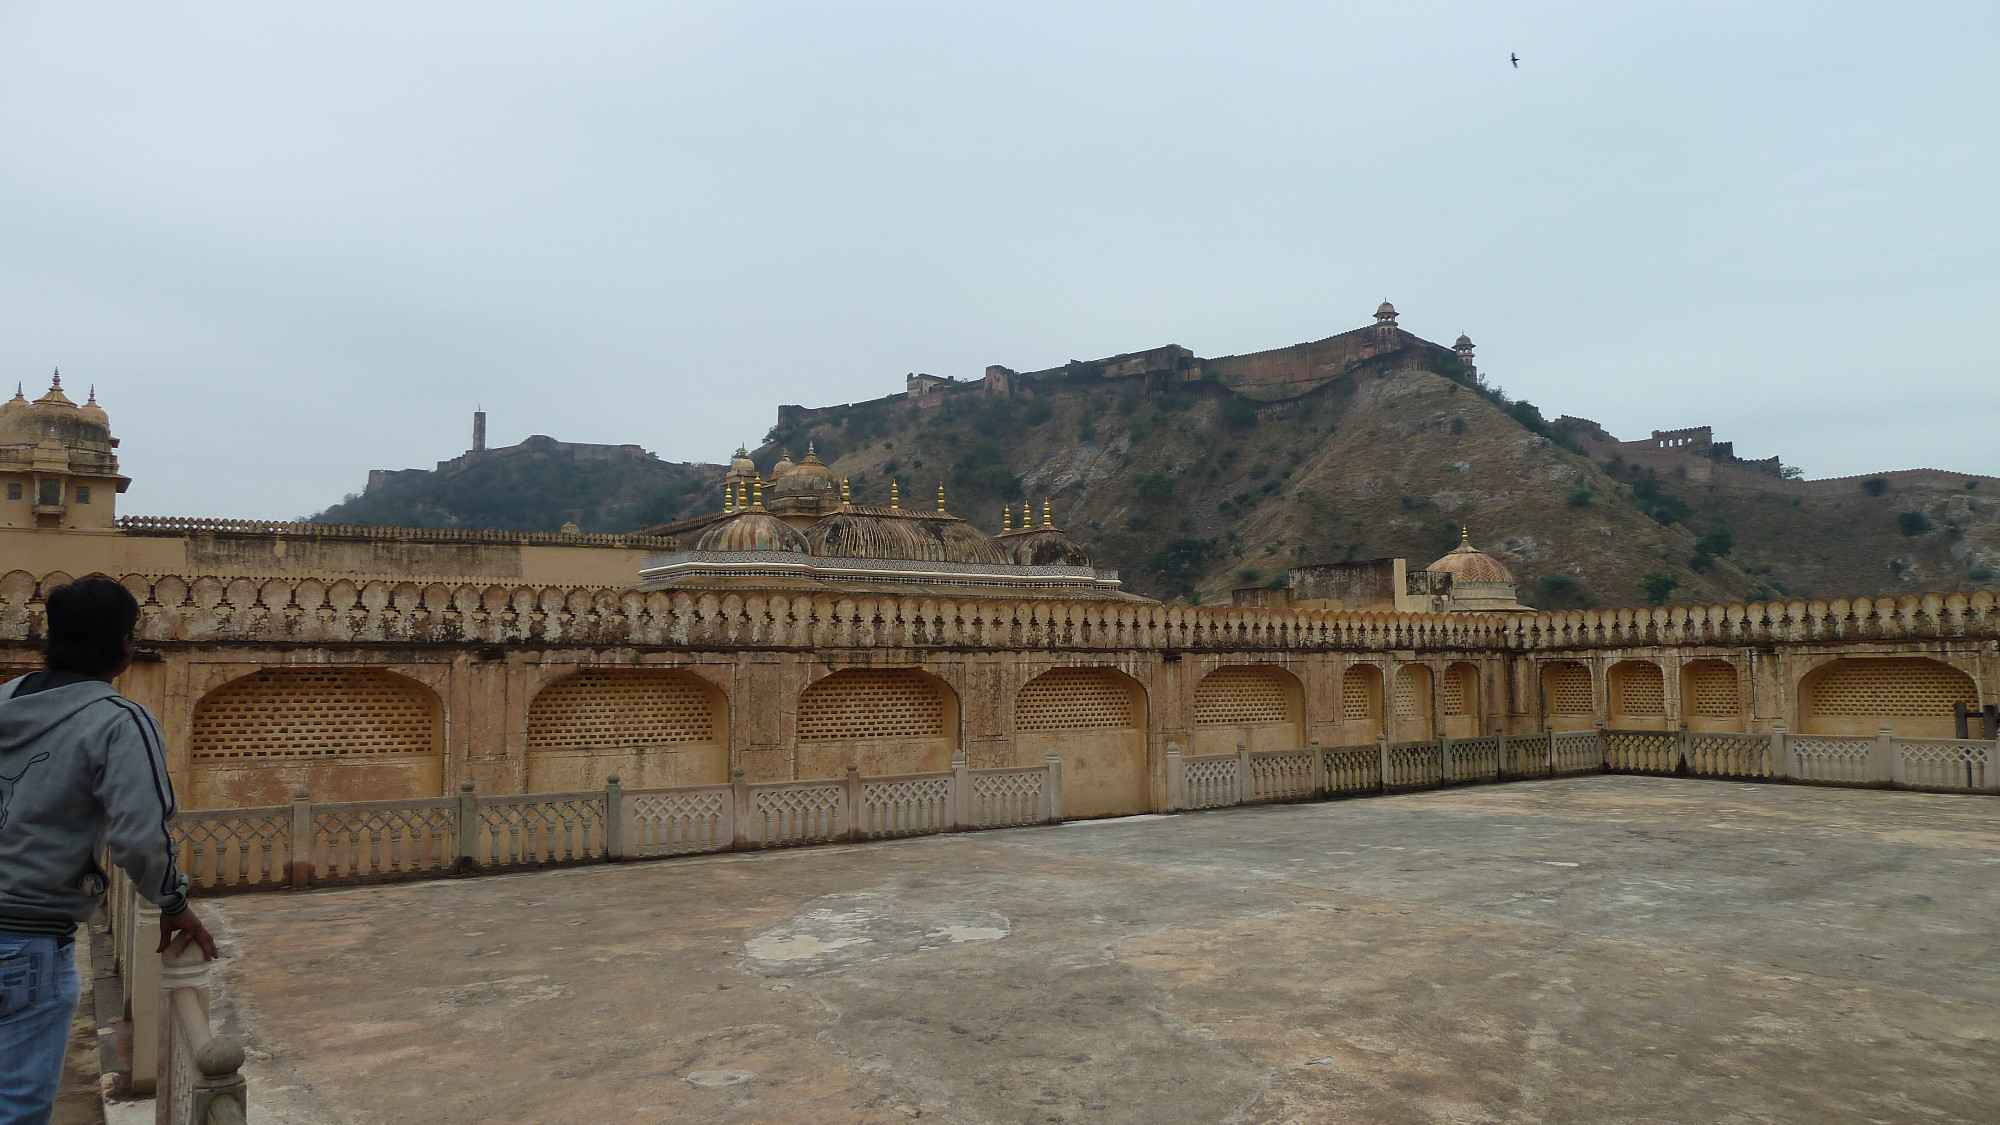 Jaigarh Fort as seen from Amber Fort